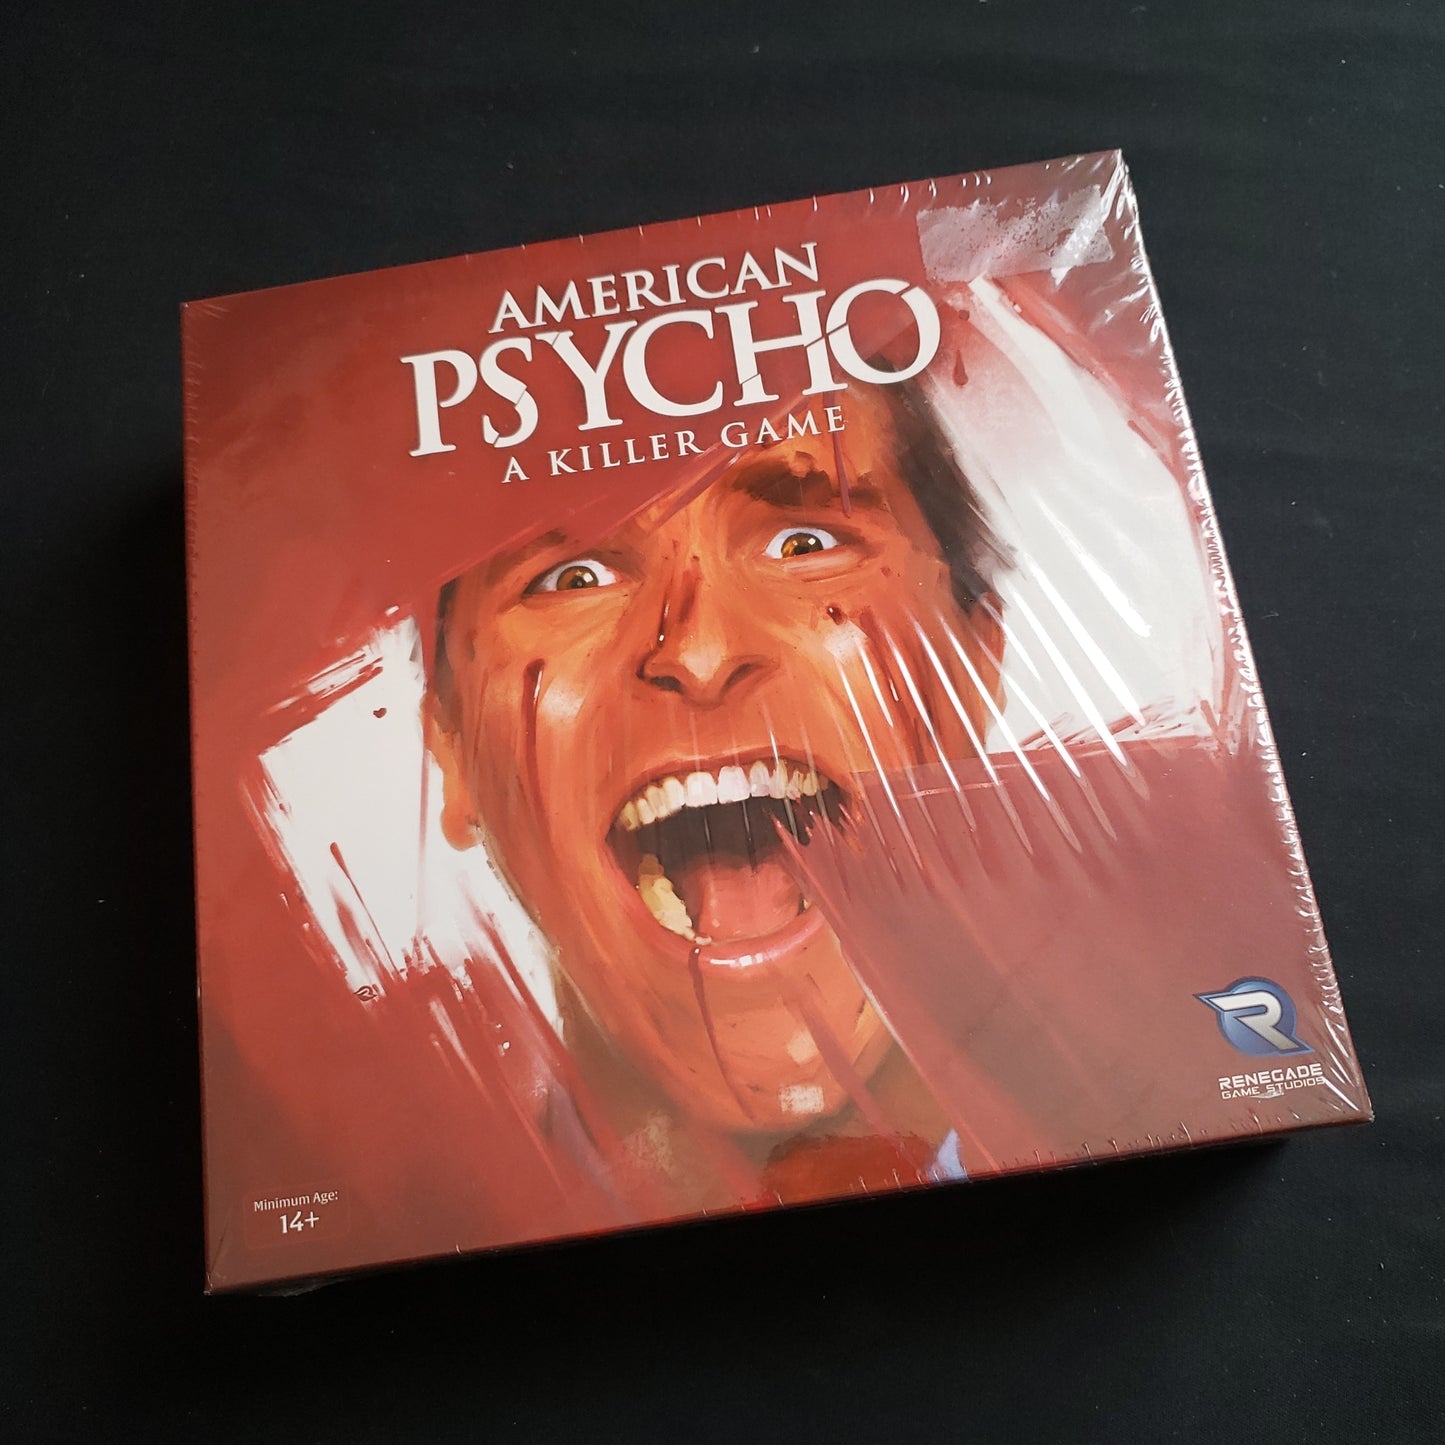 Image shows the front cover of the box of the American Psycho card game